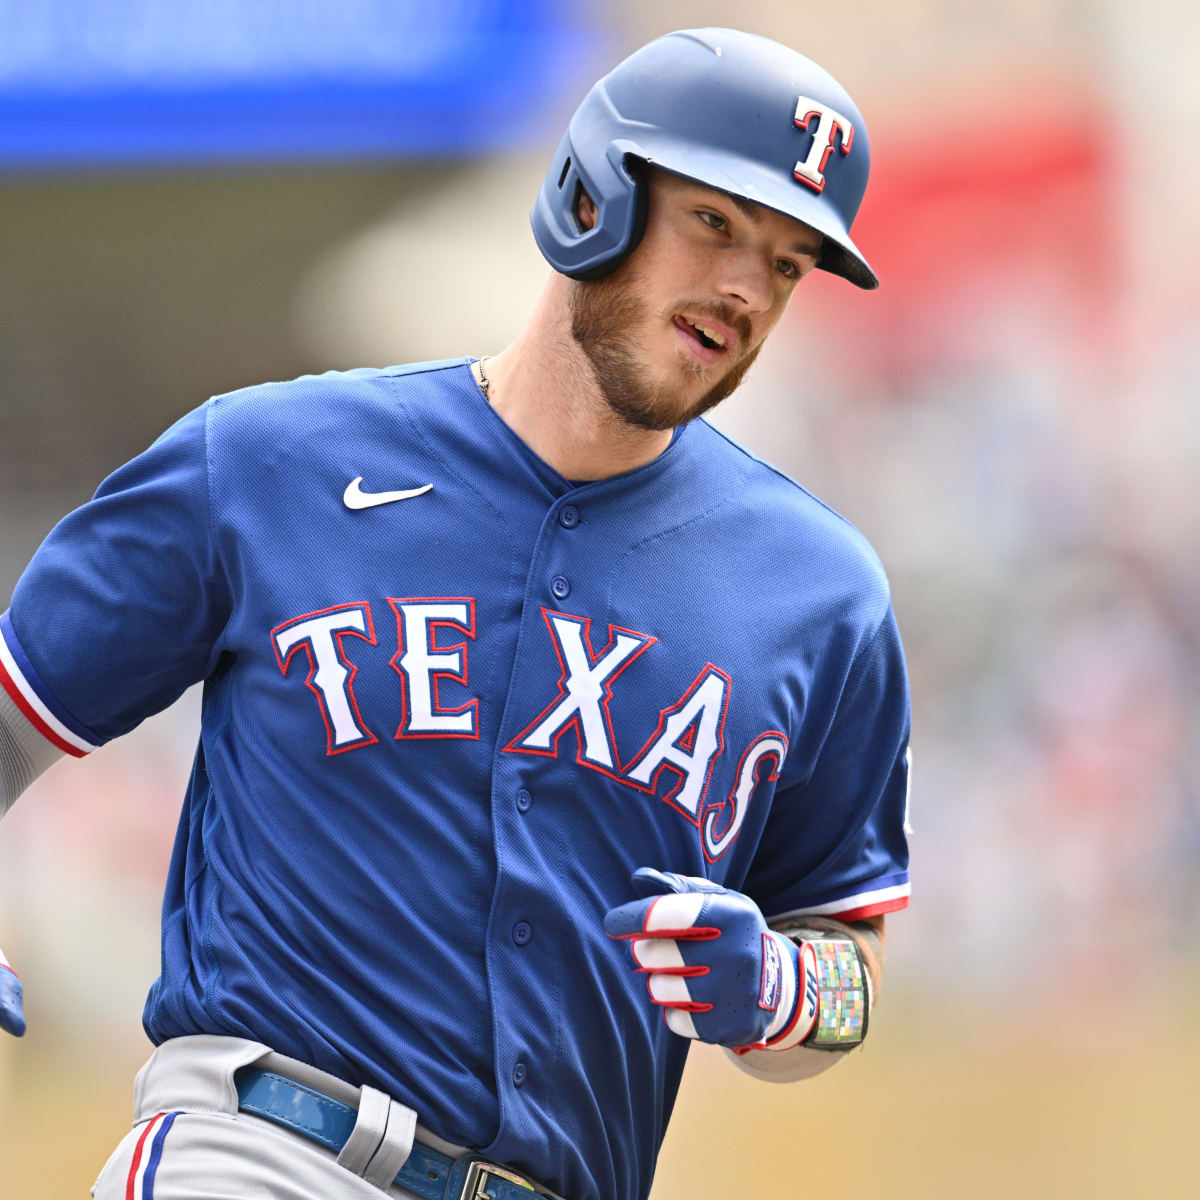 Rangers go 105 innings without leading during 12-game skid